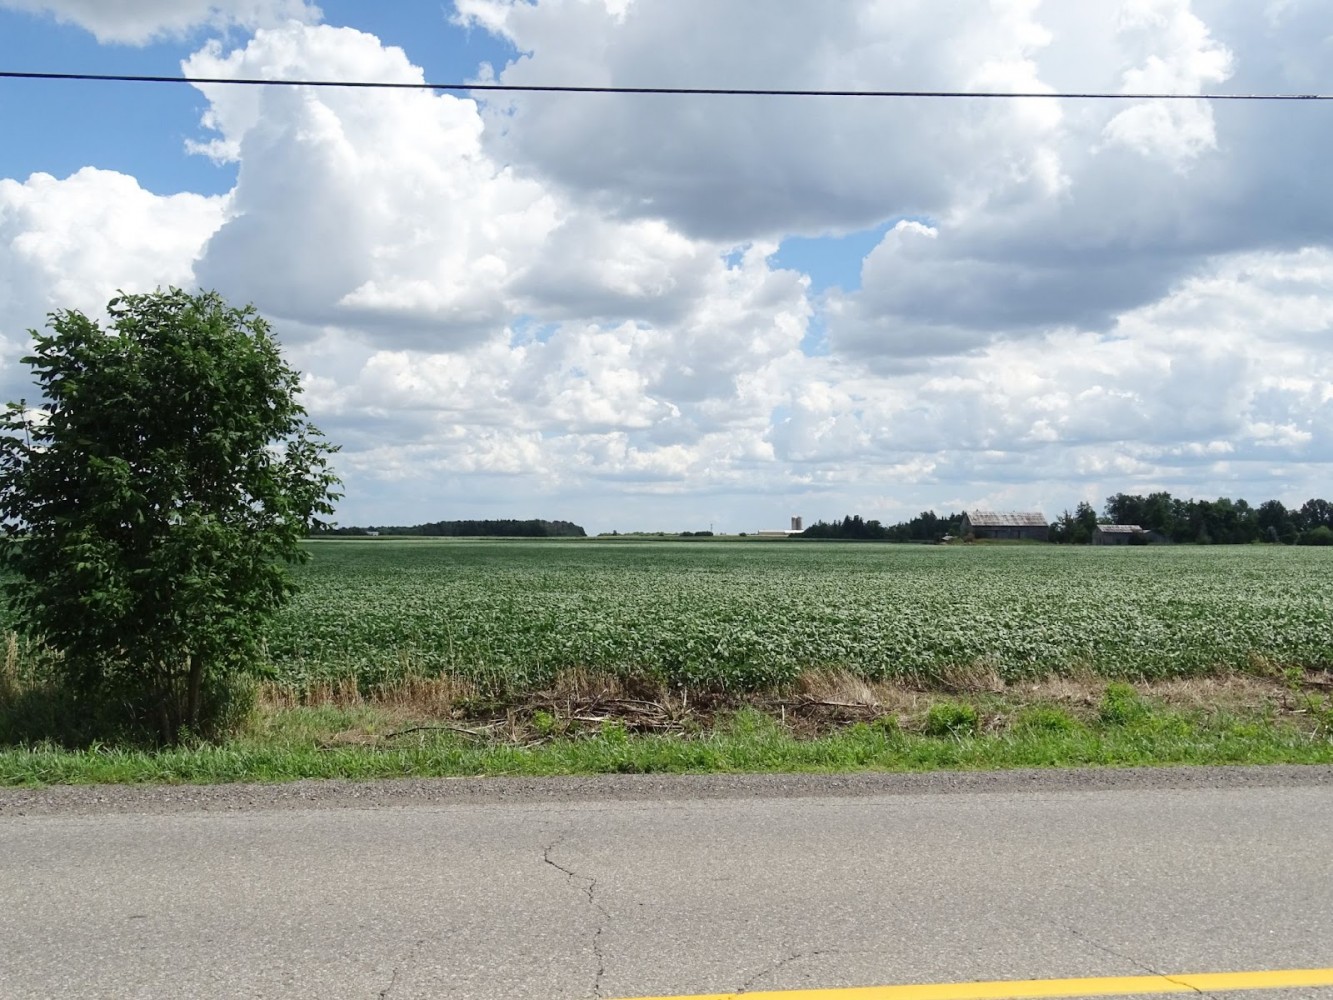 Peel approves urban expansion into nearly 11,000 acres of farmland and green space